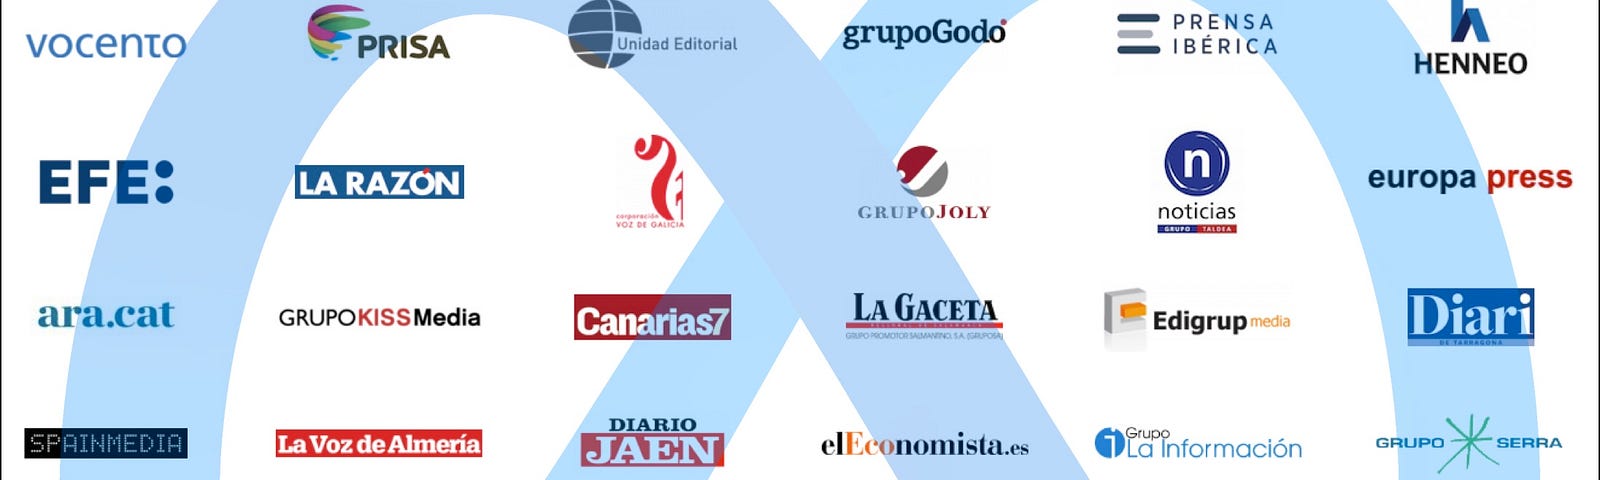 IMAGE: The logos of the Spanish newspapers under AMI (Association of Information Media) and, on top of it, the Meta logo